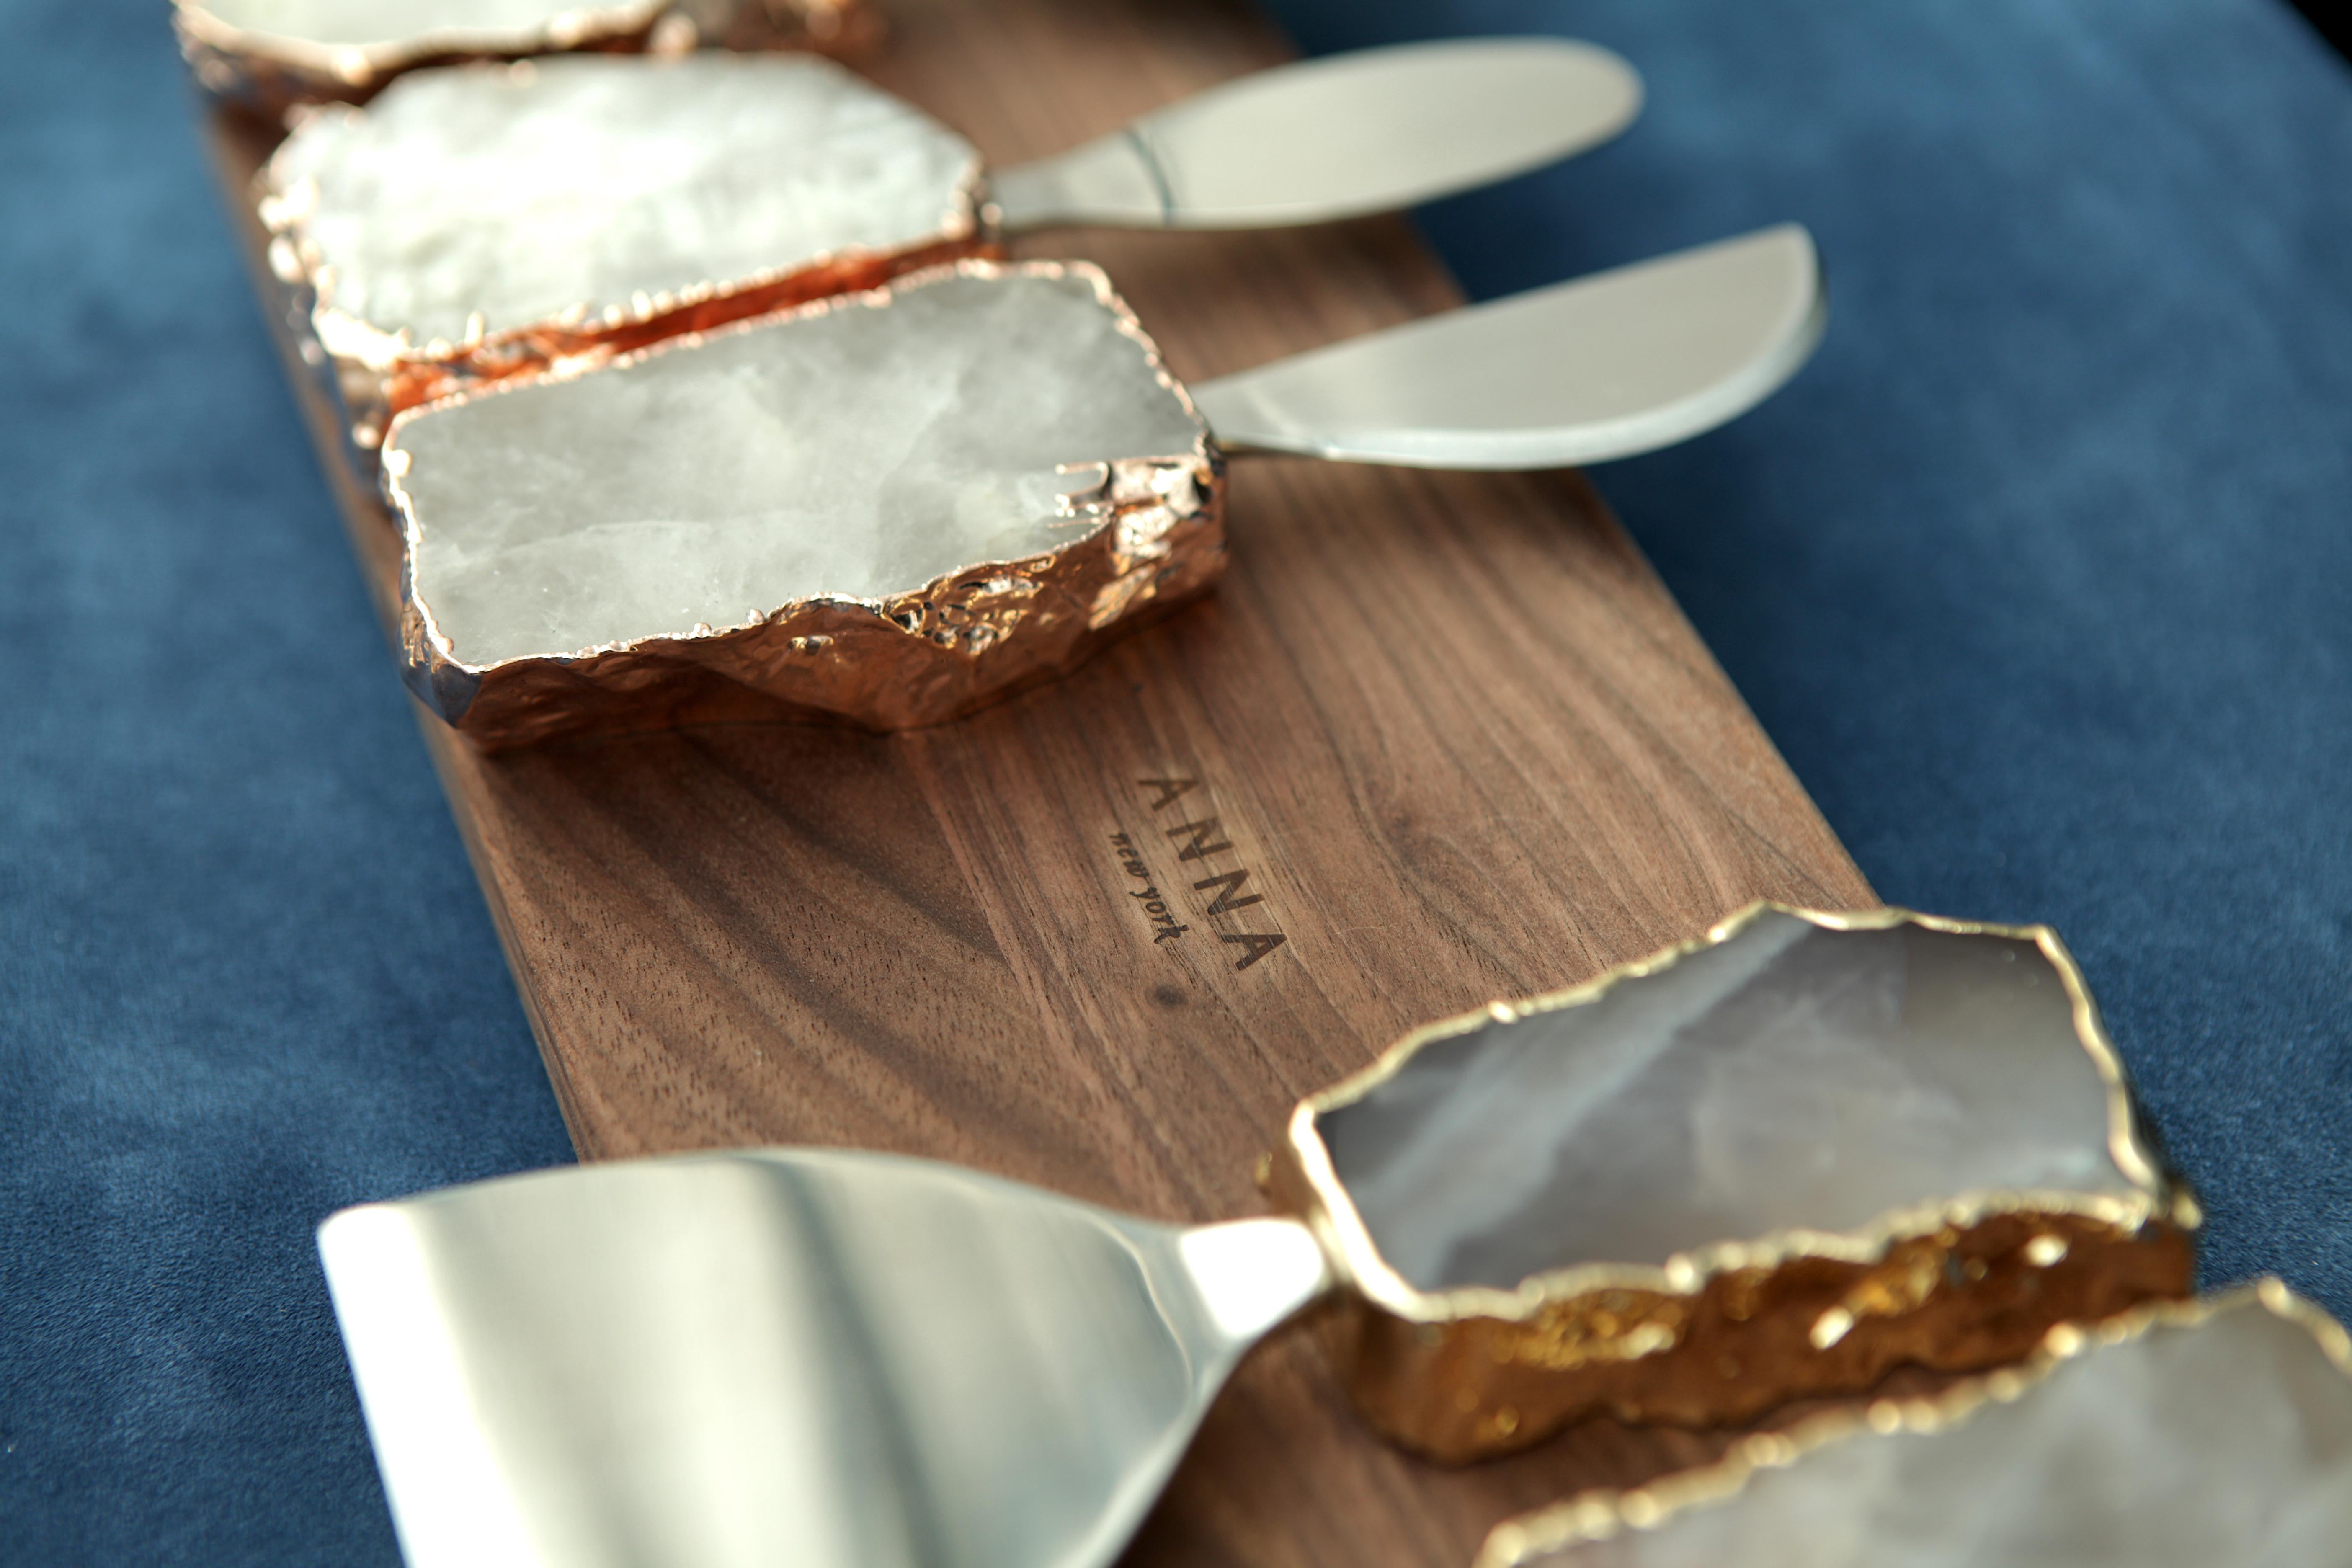 The Kiva Cheese Set is a trio of knives and spreaders designed to easily cut hard cheeses, to smoothly spread soft cheeses, and to delight all guests. The handles are crafted from beautiful semi-precious gemstones like Crystal, which is thought to